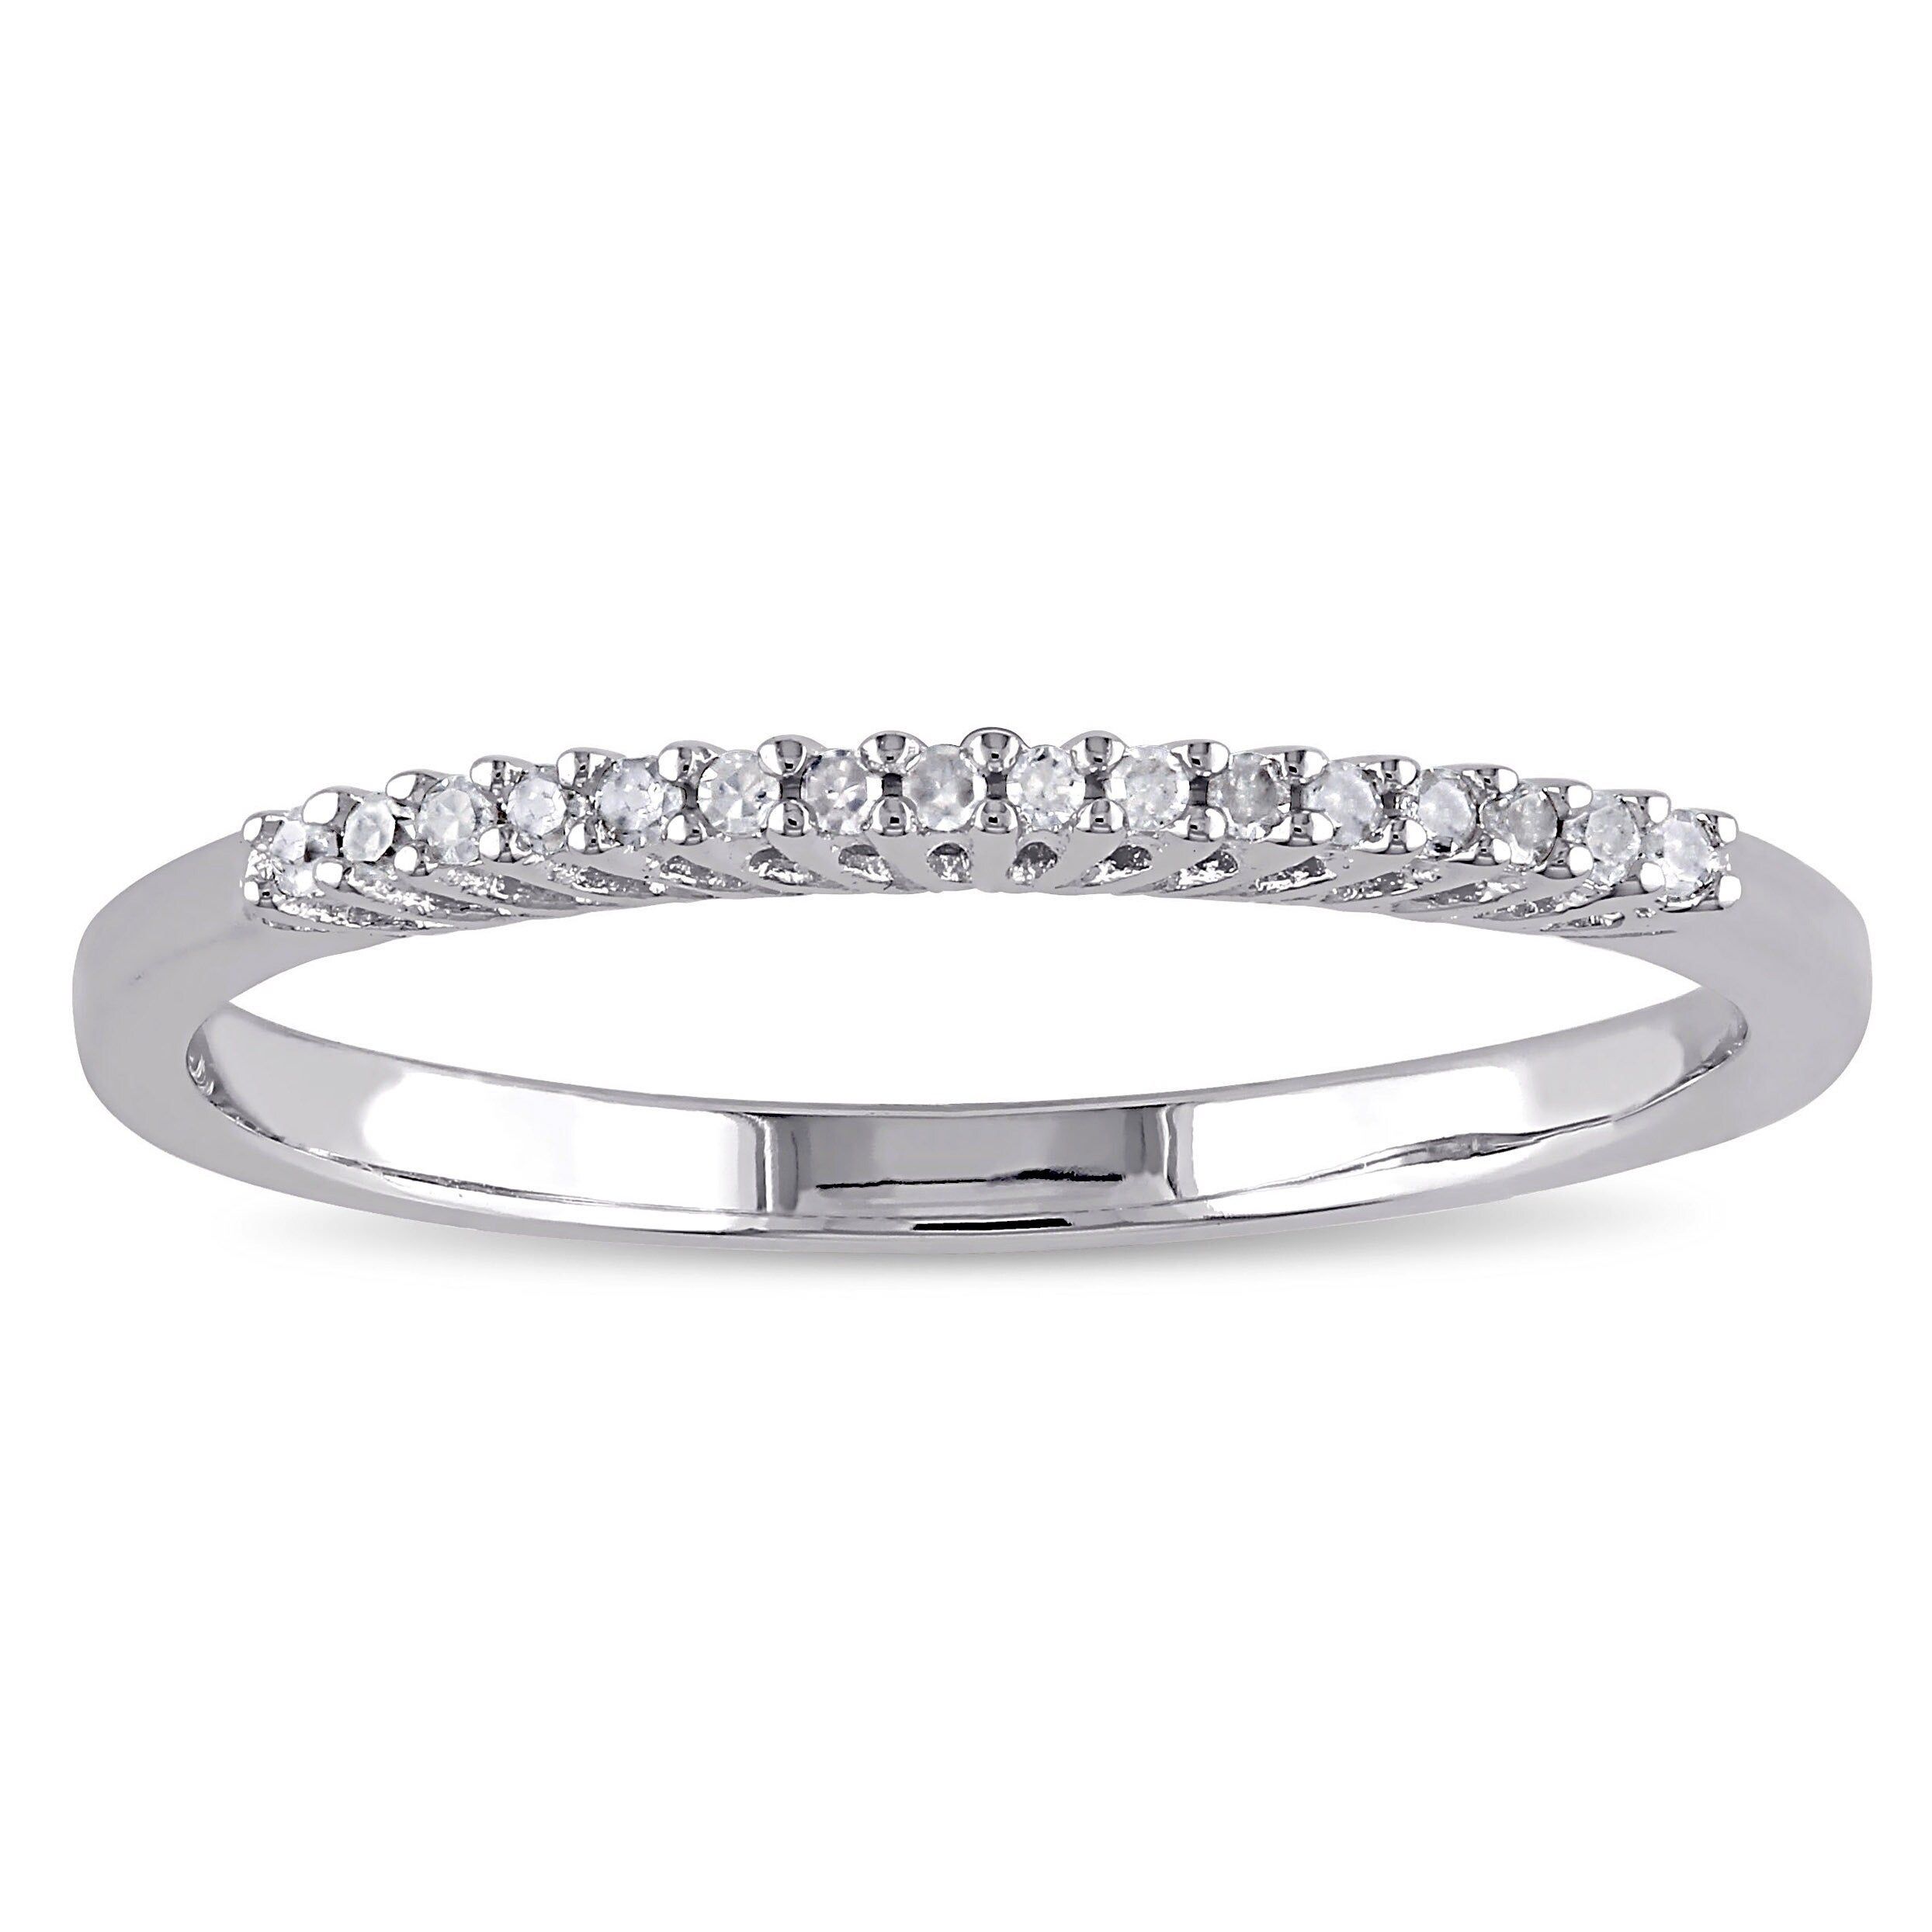 Miadora Sterling Silver Diamond Accent Wedding Band – White With Most Current Diamond Accent Anniversary Bands In Sterling Silver (View 1 of 25)